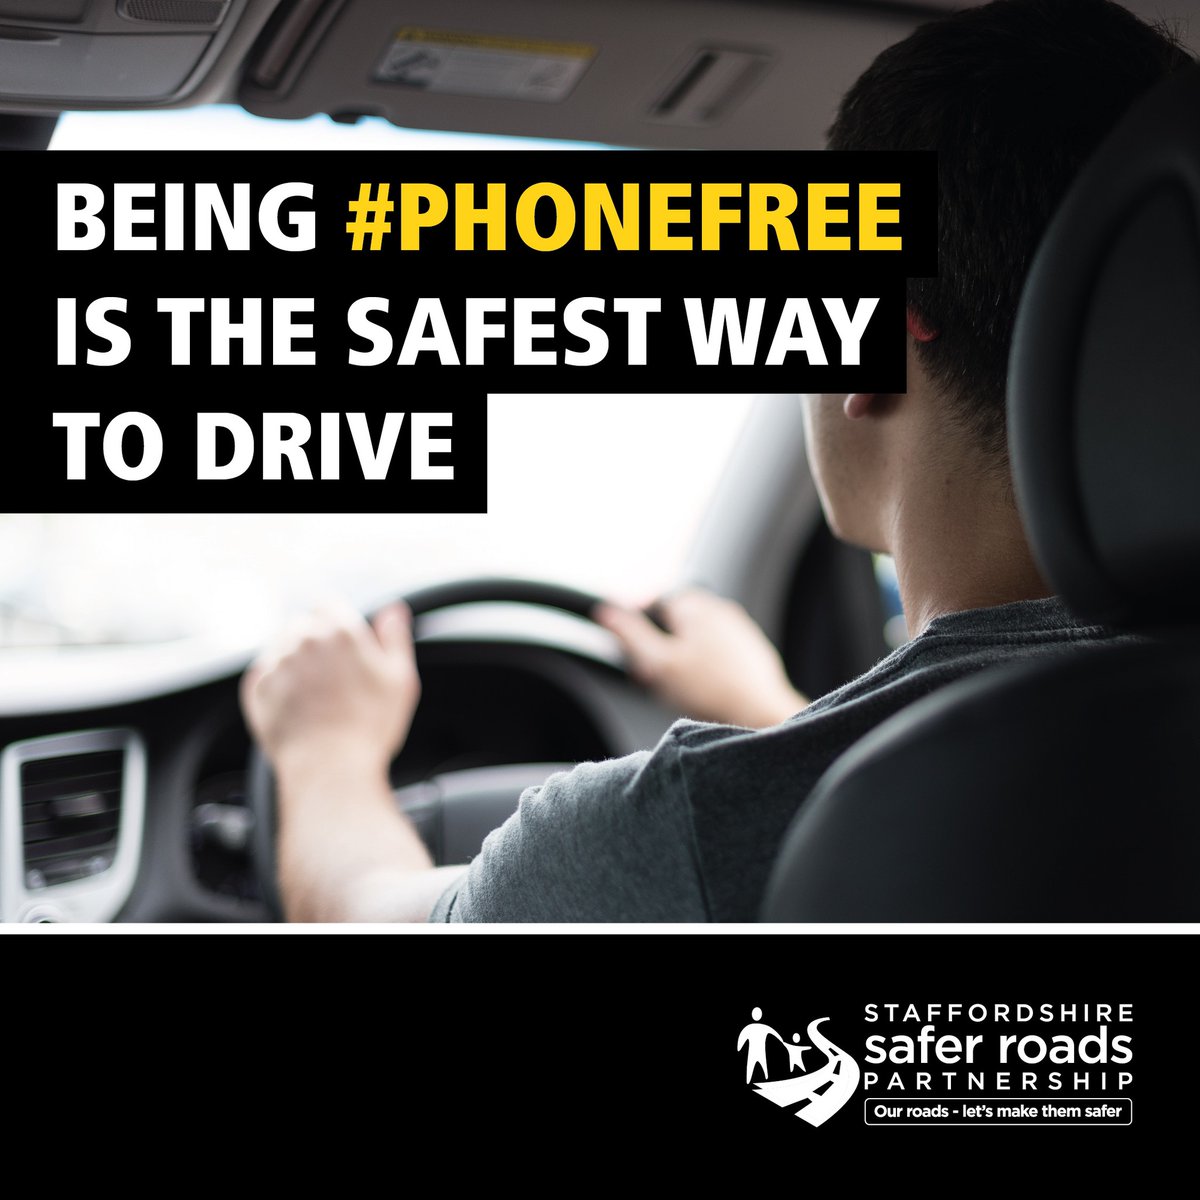 You can’t focus on two things at once, any distraction whilst driving can be dangerous and risks everyone in your vehicle as well as other road users.

Keep your 👀 on the road at all times and drive #PhoneFree #fatalfour @StaffsSafeRoads